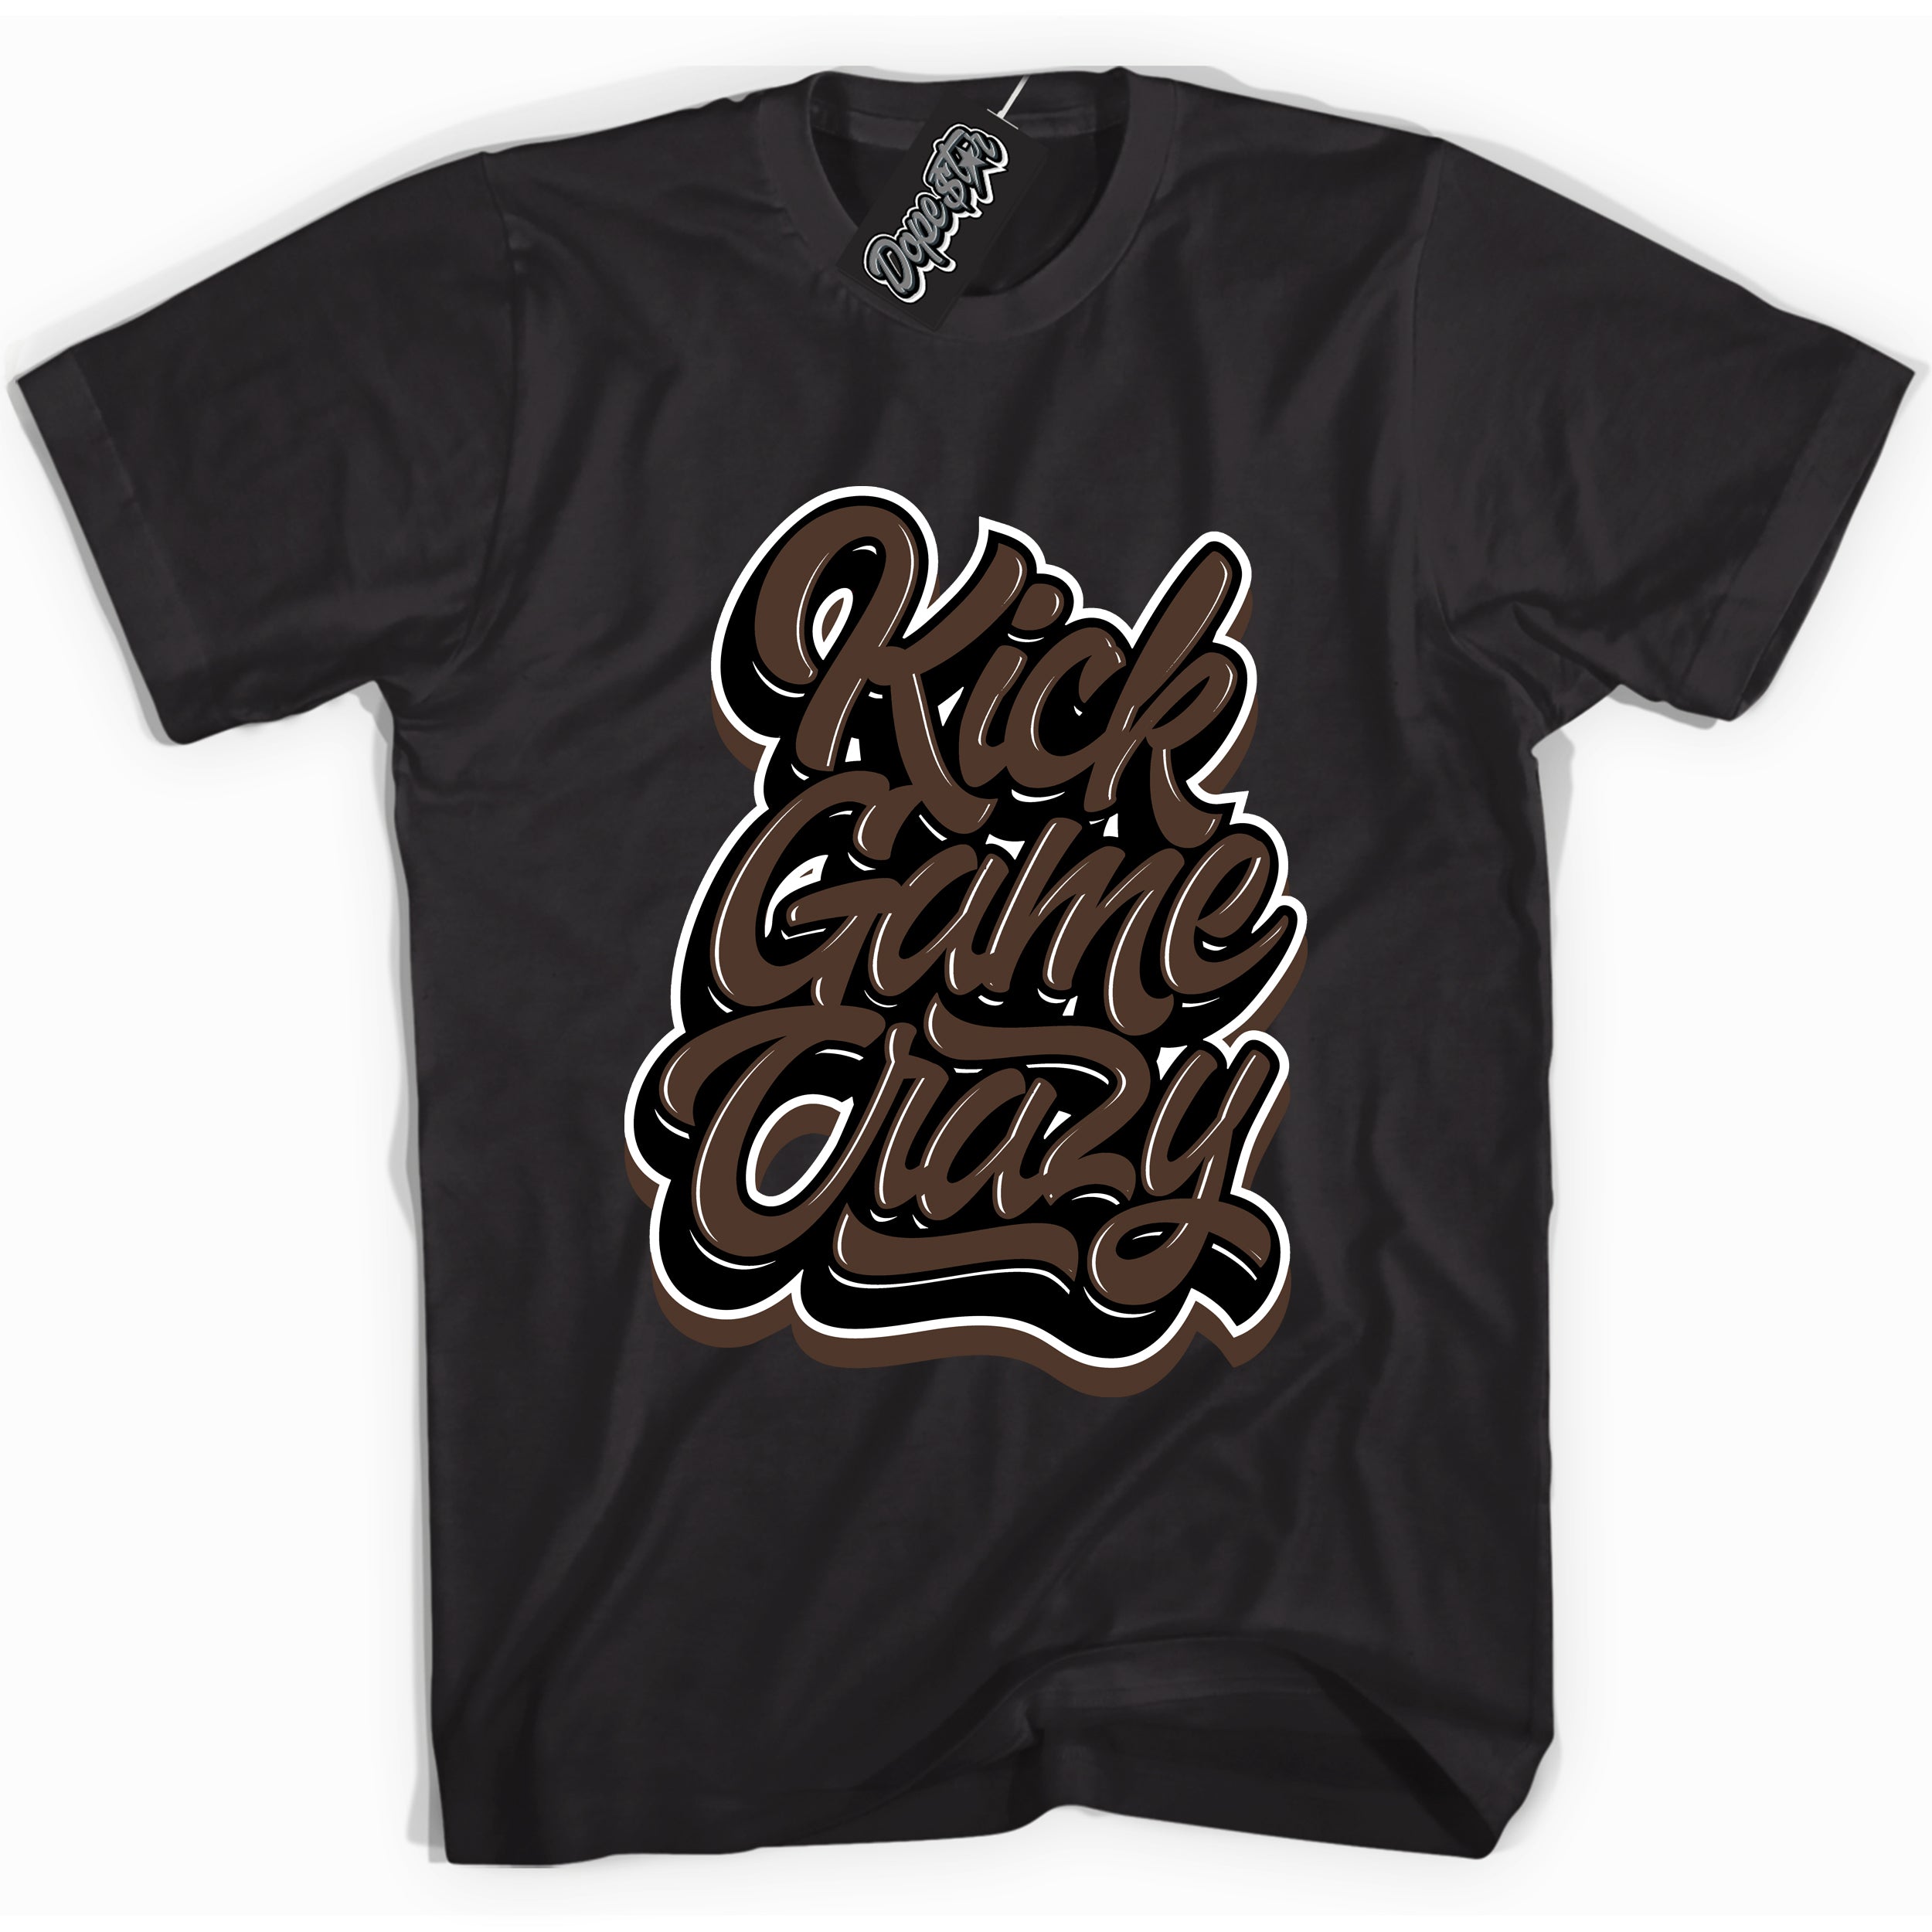 Cool Black graphic tee with “ Kick Game Crazy ” design, that perfectly matches Palomino 1s sneakers 